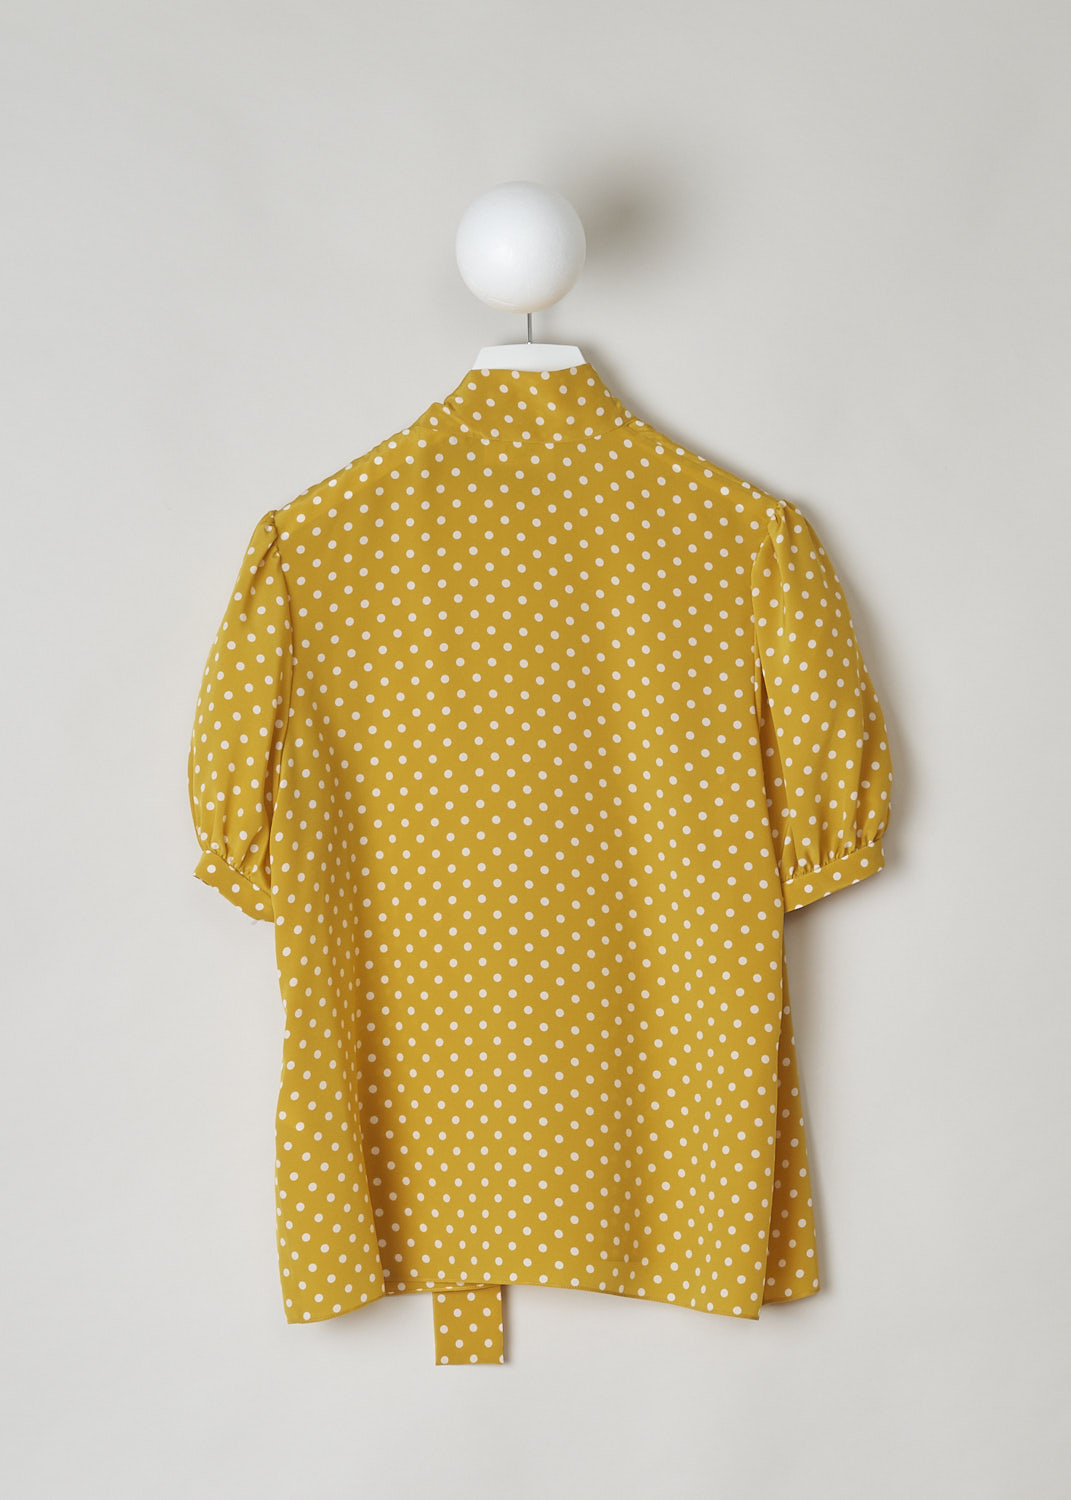 CELINE, MUSTARD YELLOW POLKA DOT TOP WITH PUSSY BOW, 966H_2B606_11TC, Yellow, Print, Back, This mustard yellow top has a white polka dot print. The top has a high neck with a pussy bow to one side. The top has short puff sleeves. The closure option is a concealed zipper on the left shoulder.   
